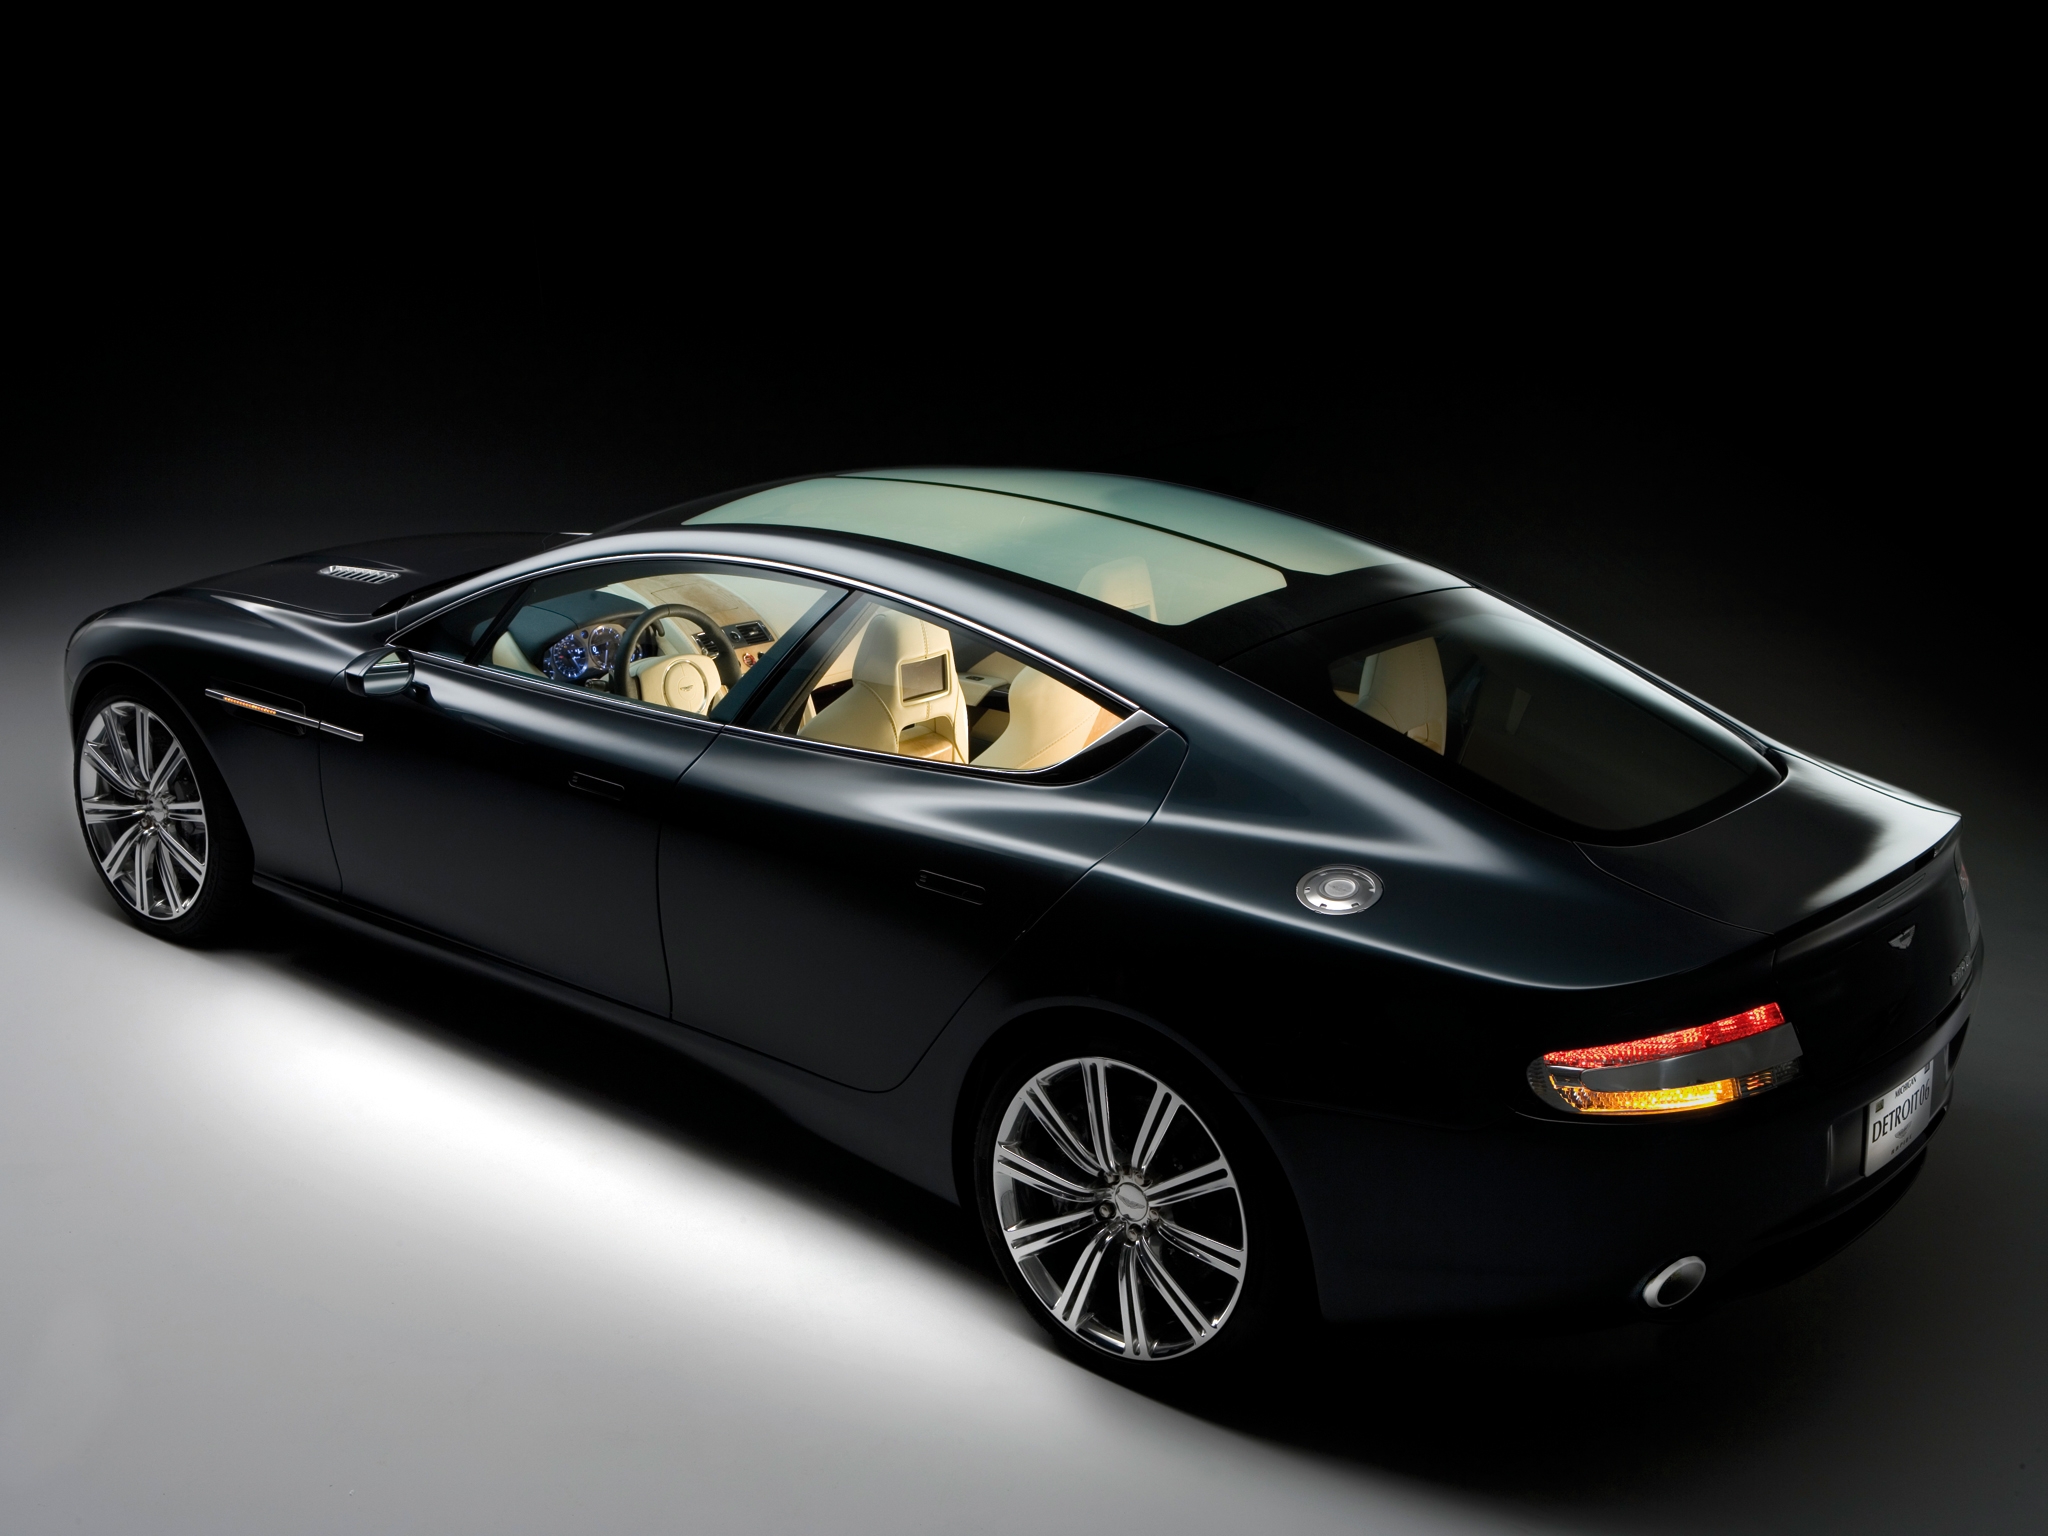 116174 download wallpaper aston martin, cars, black, side view, style, concept car, 2006, rapide screensavers and pictures for free